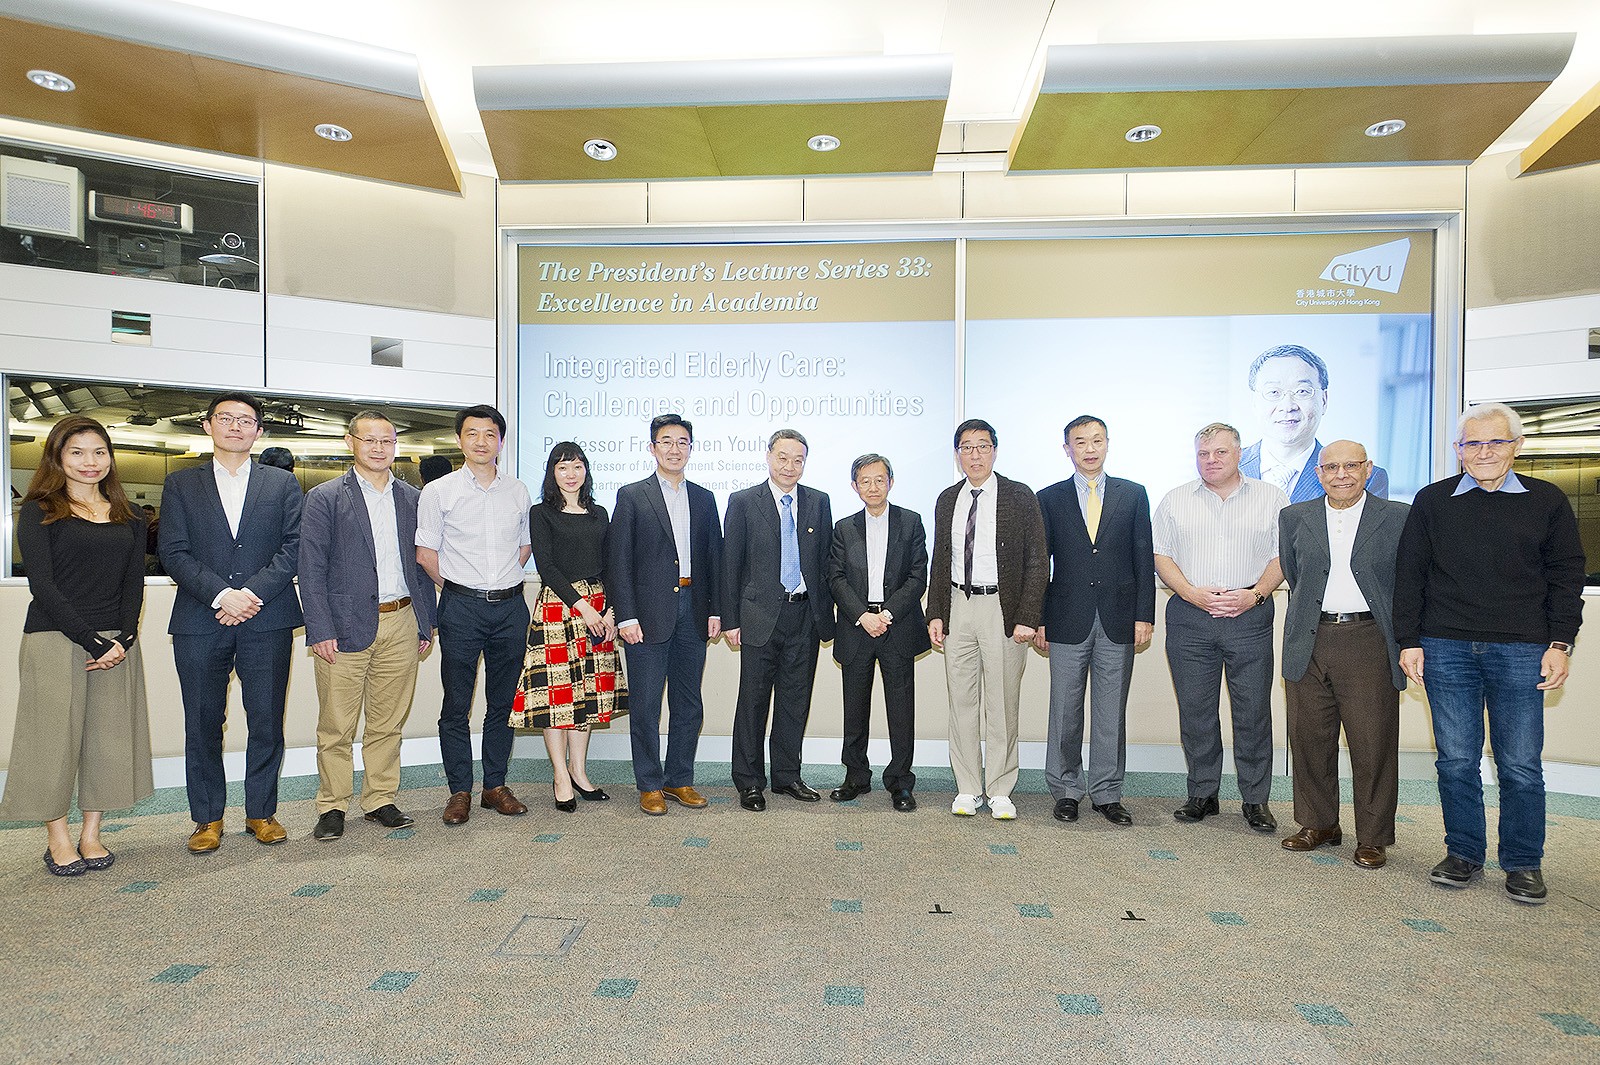 The talk was well attended by senior figures at CityU.